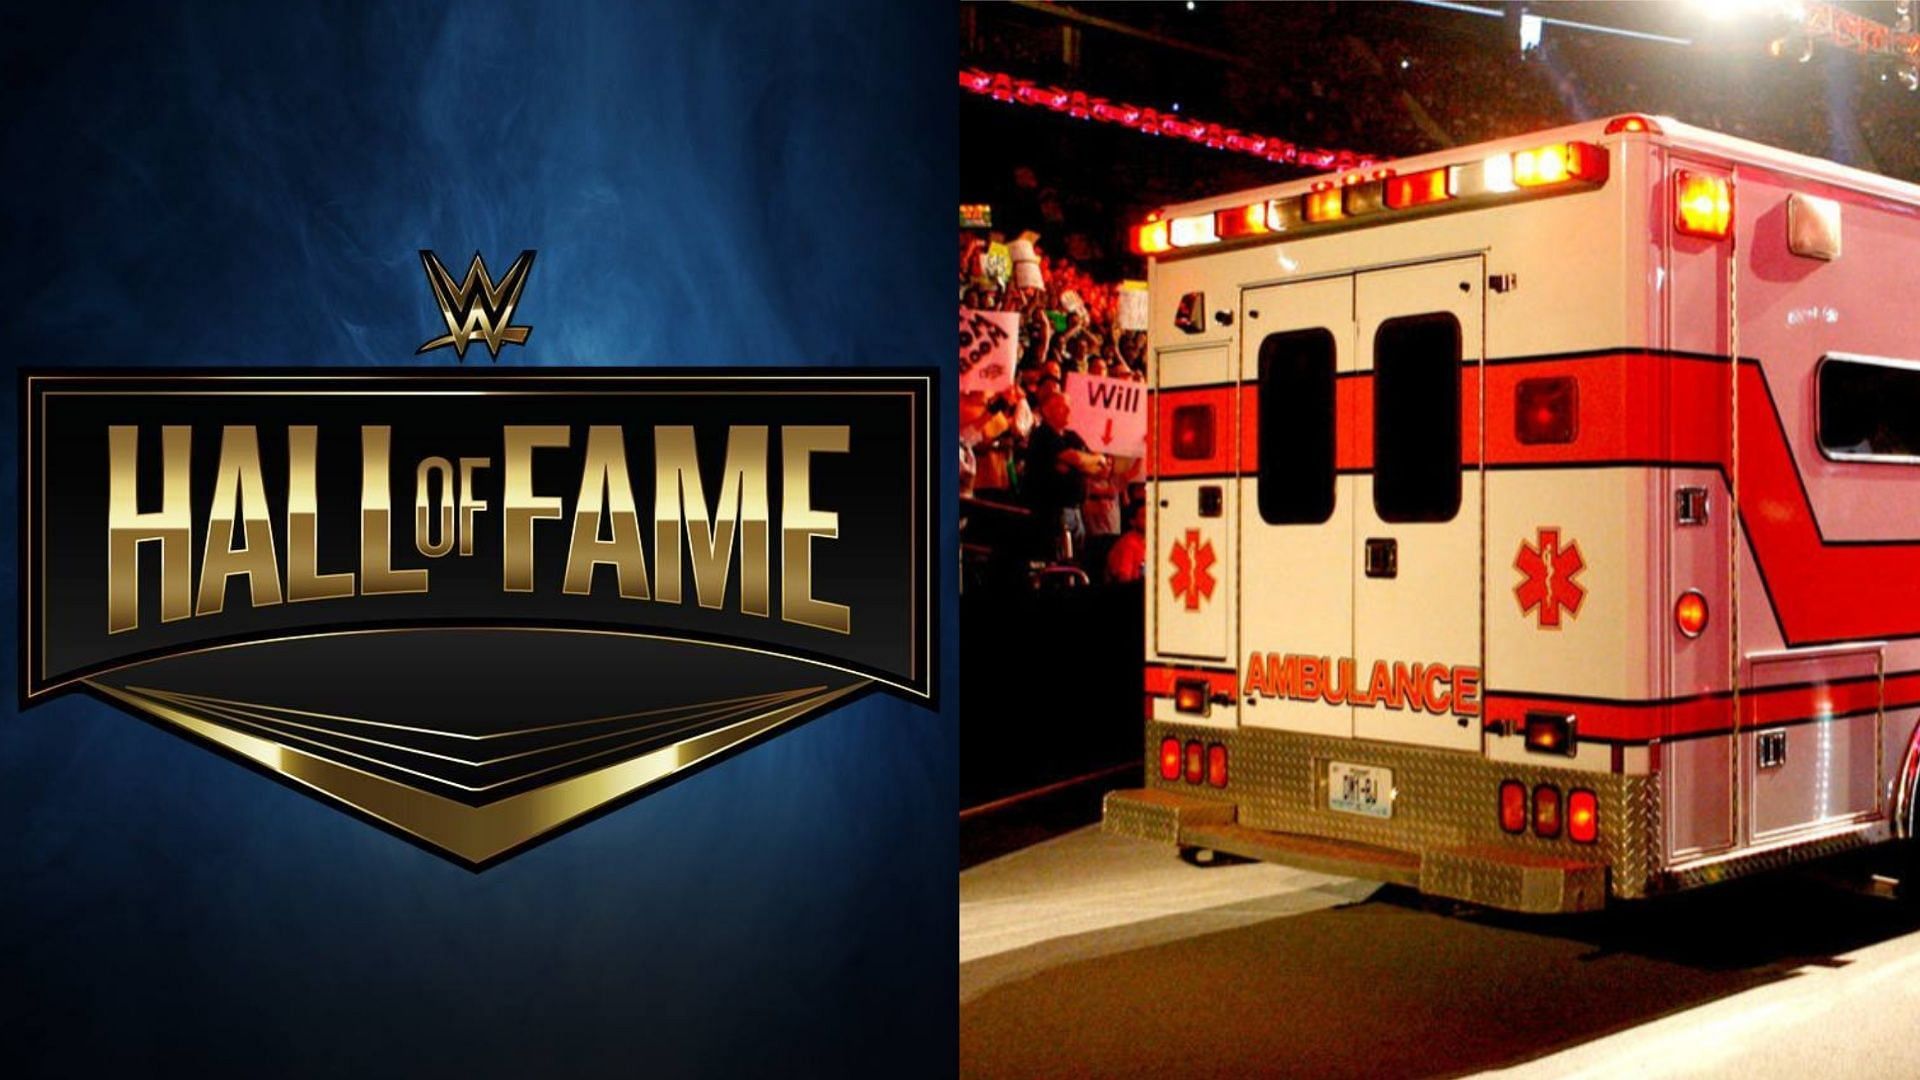 A WWE Hall of Famer recently underwent emergency surgery.